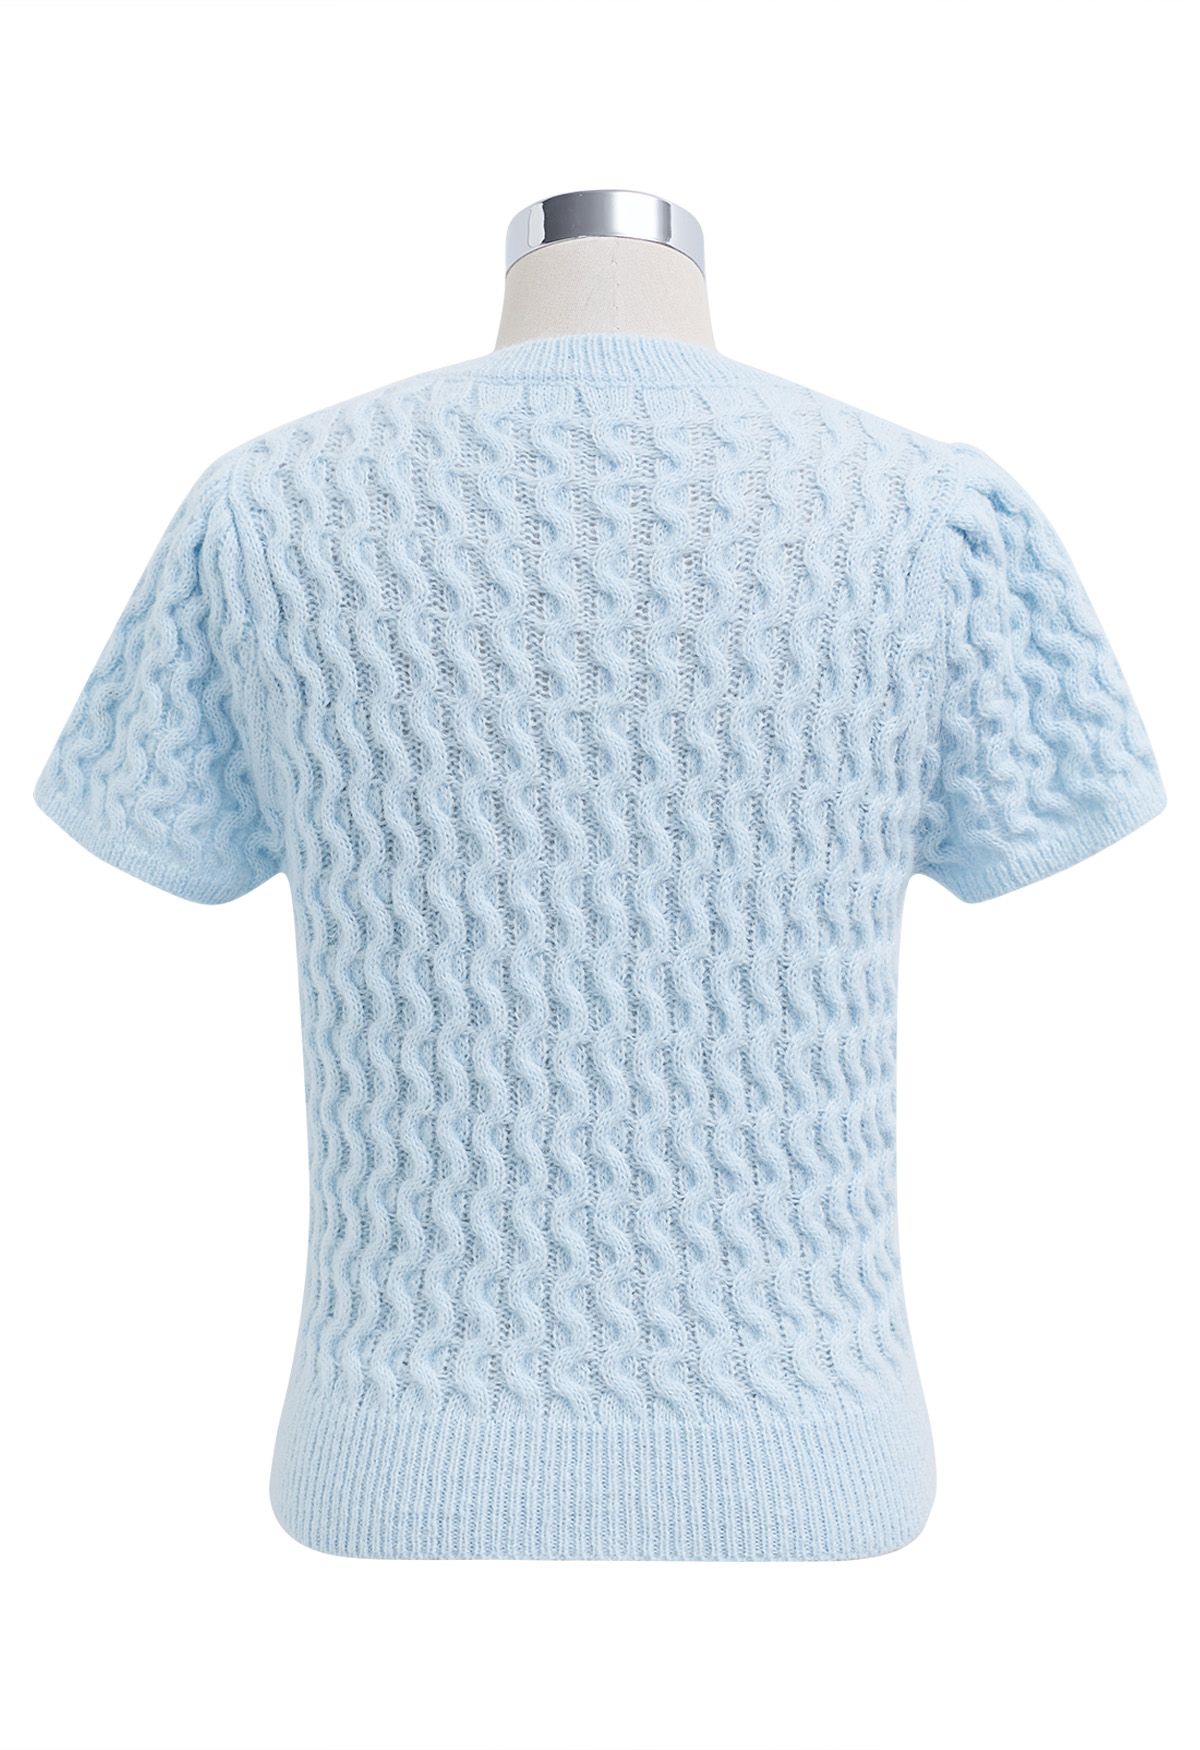 Endearing Bowknot Embellished Short Sleeve Knit Top in Blue